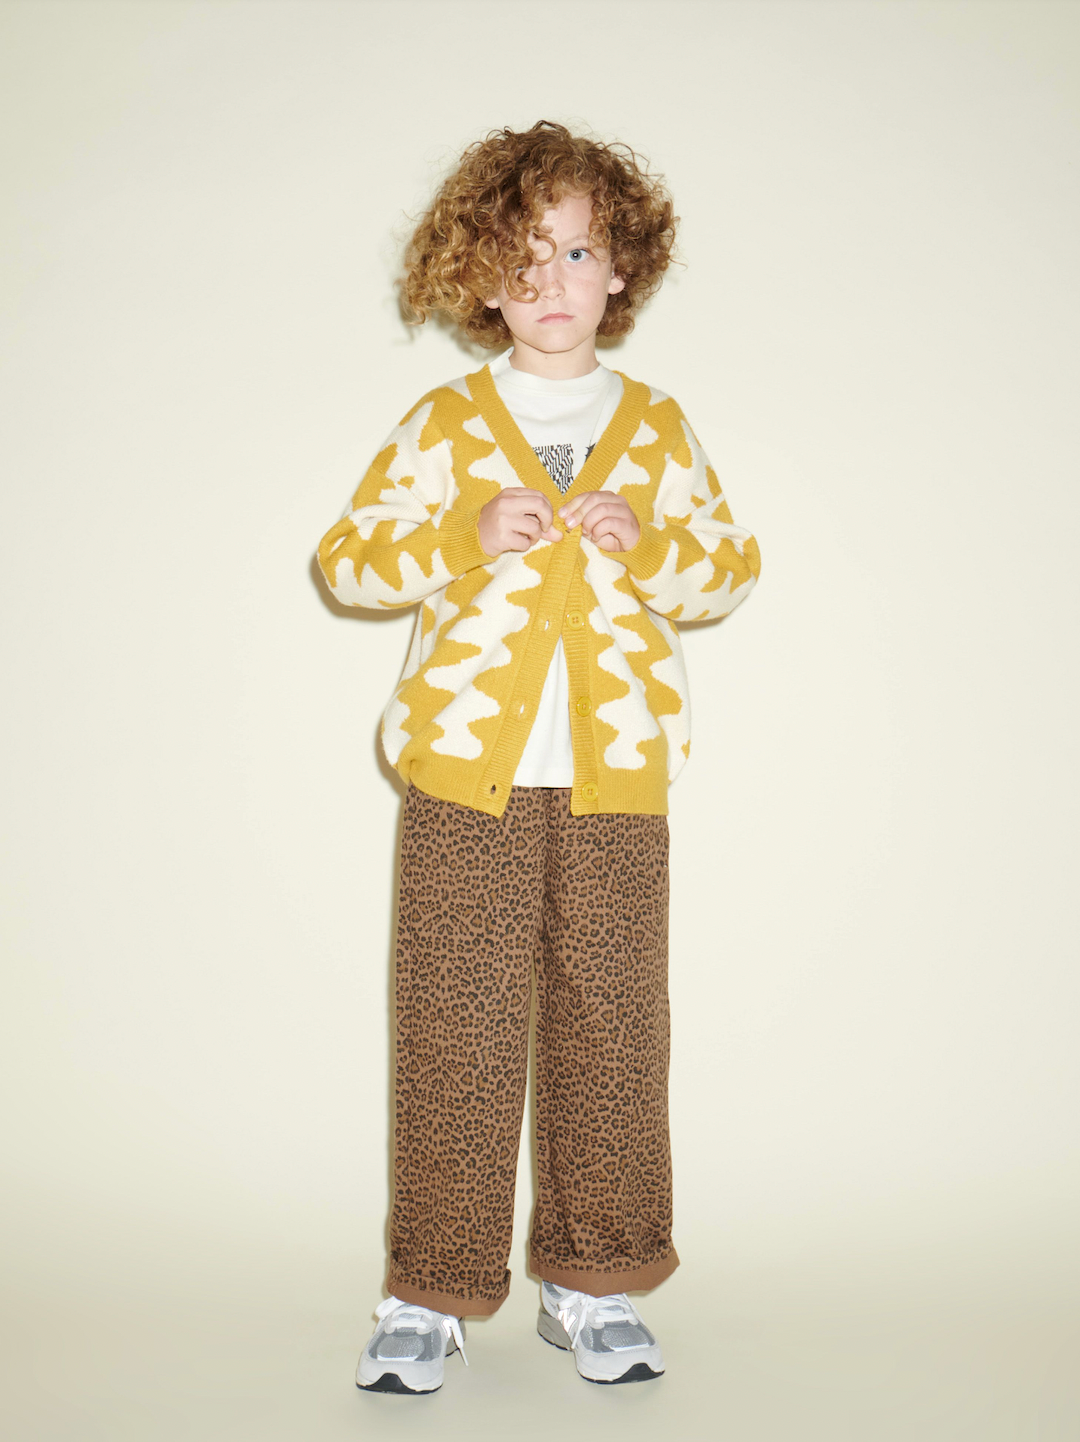 Marigold | A child wearing Marigold Wavelength Cardigan, with cheetah pants & sneakers, buttoning the sweater.